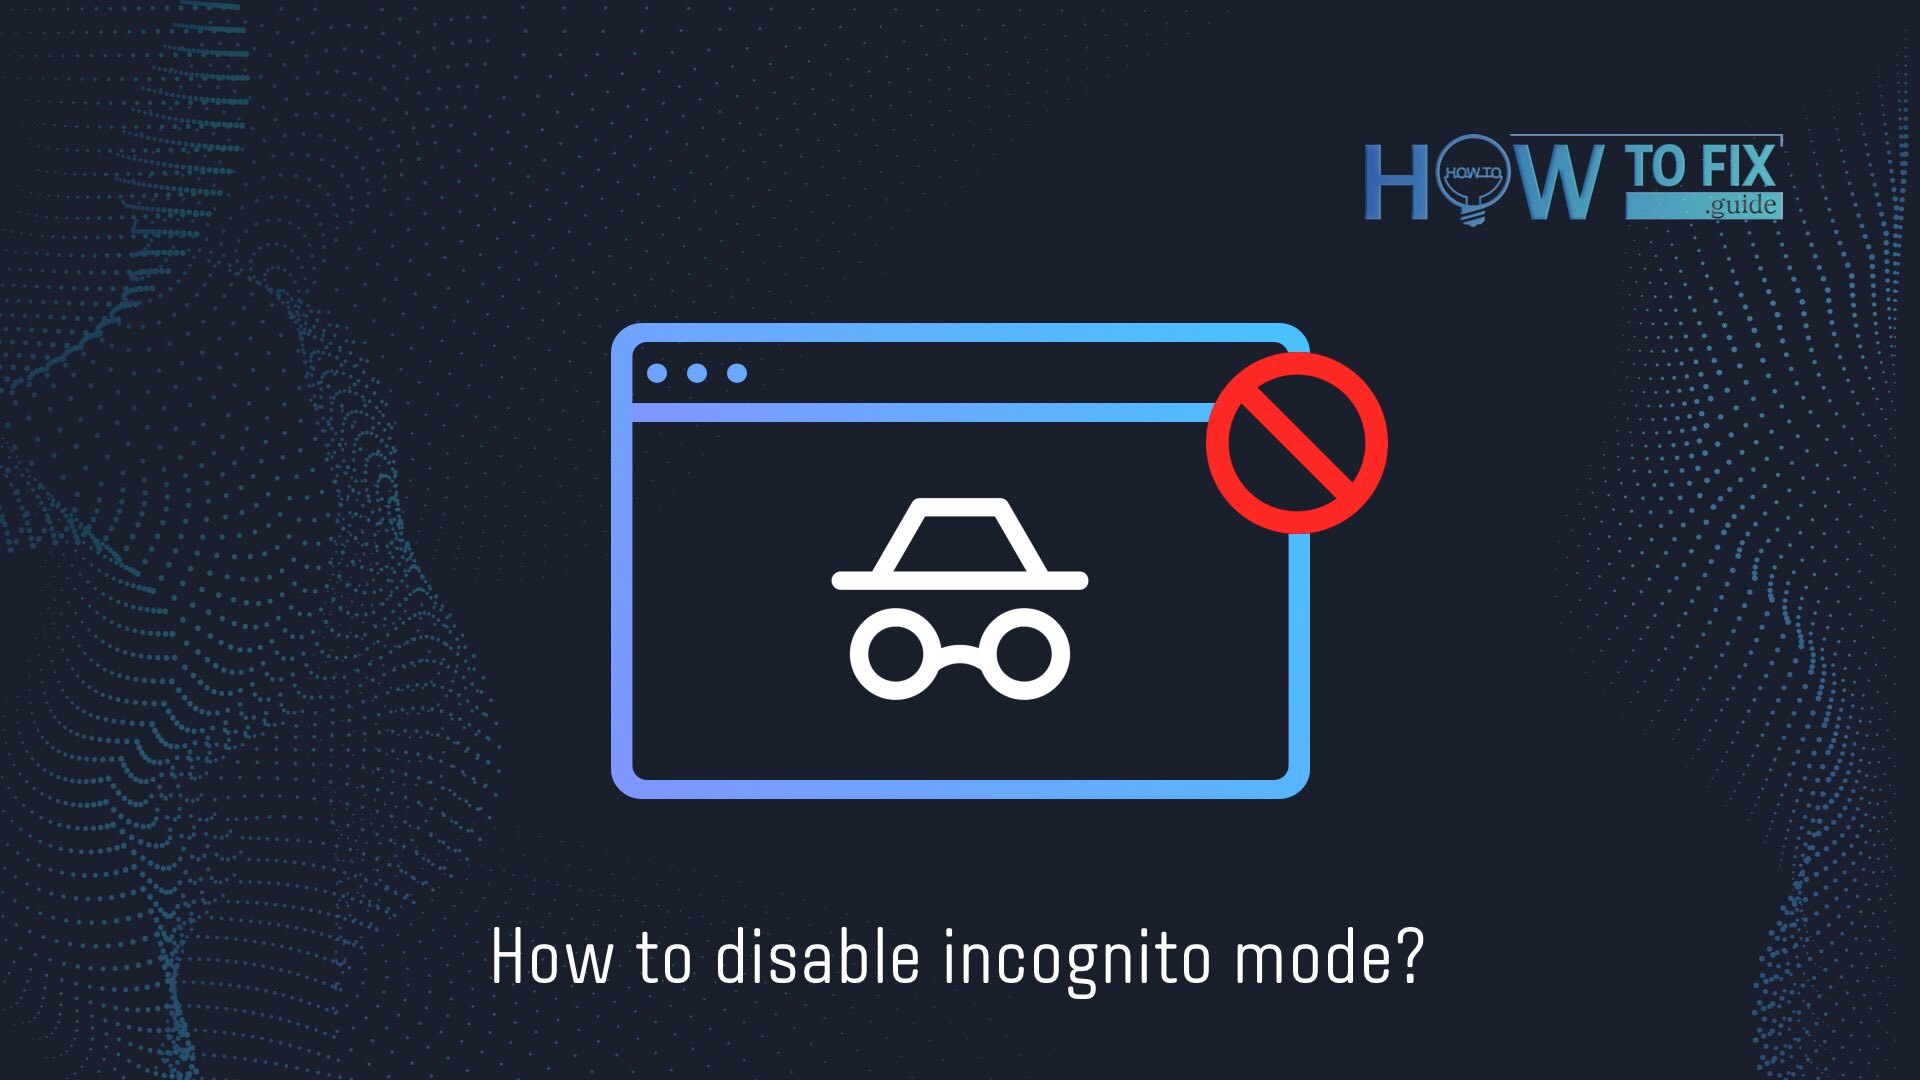 How To Disable Incognito Mode